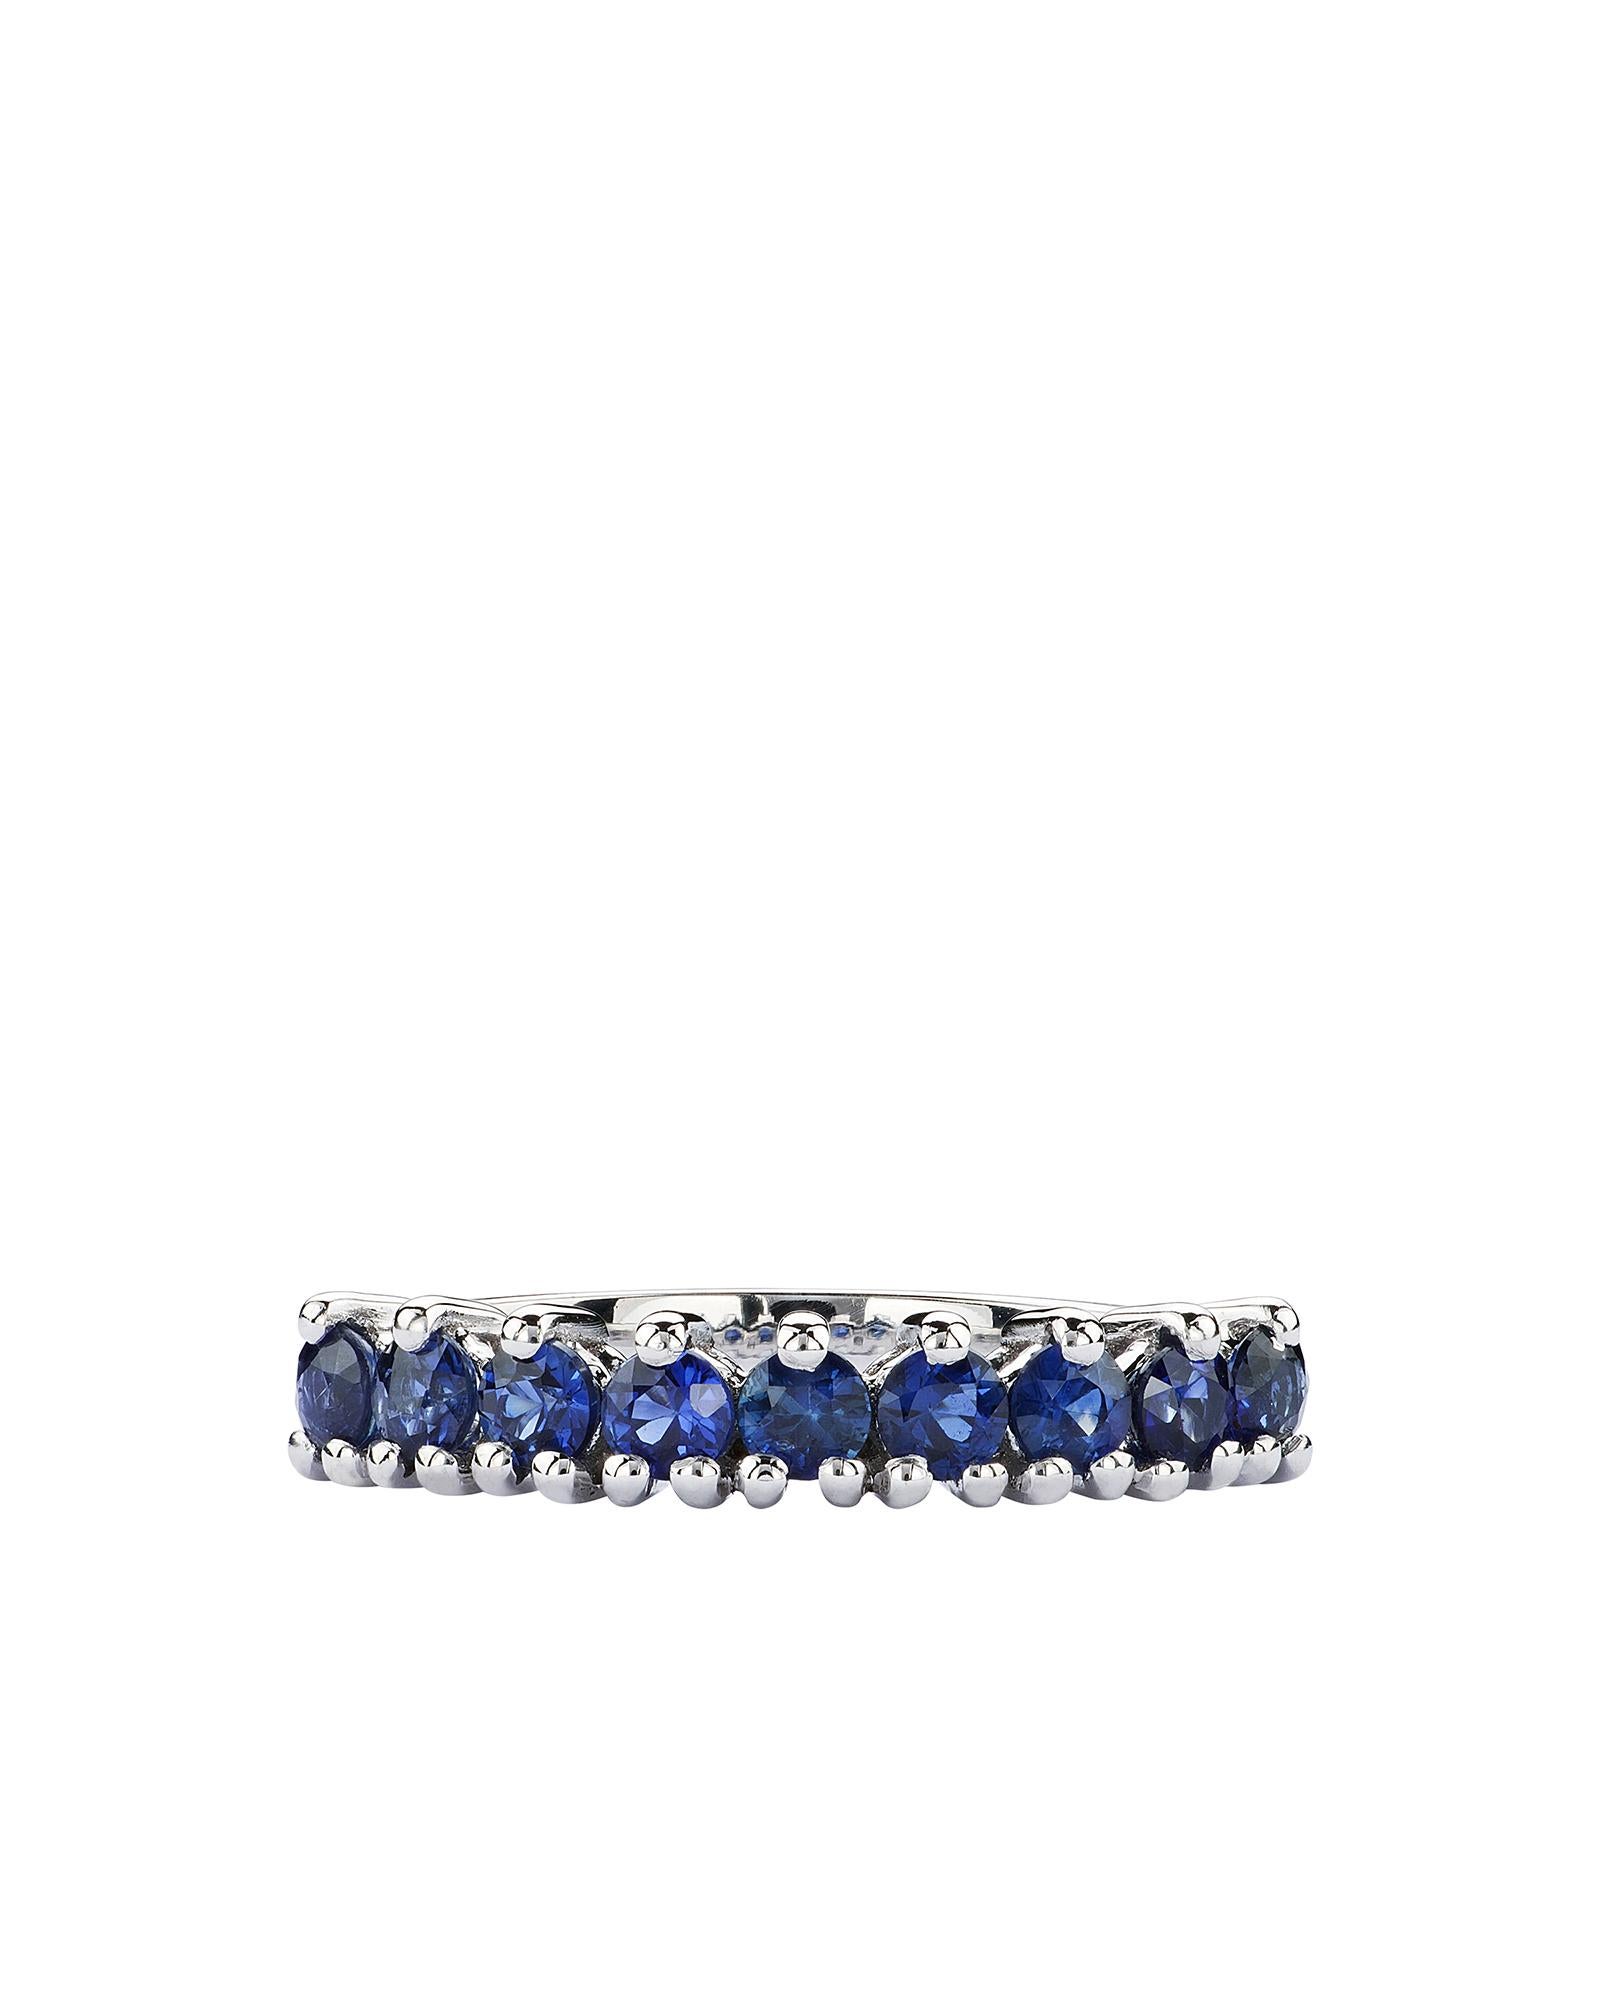 An elegant band ring with fine lines, embellished with a composition of blue sapphires capable of giving elegance and brightness. The ring can be combined with other rings of the same line with different colors. 

Characteristics:
• 18 carat white